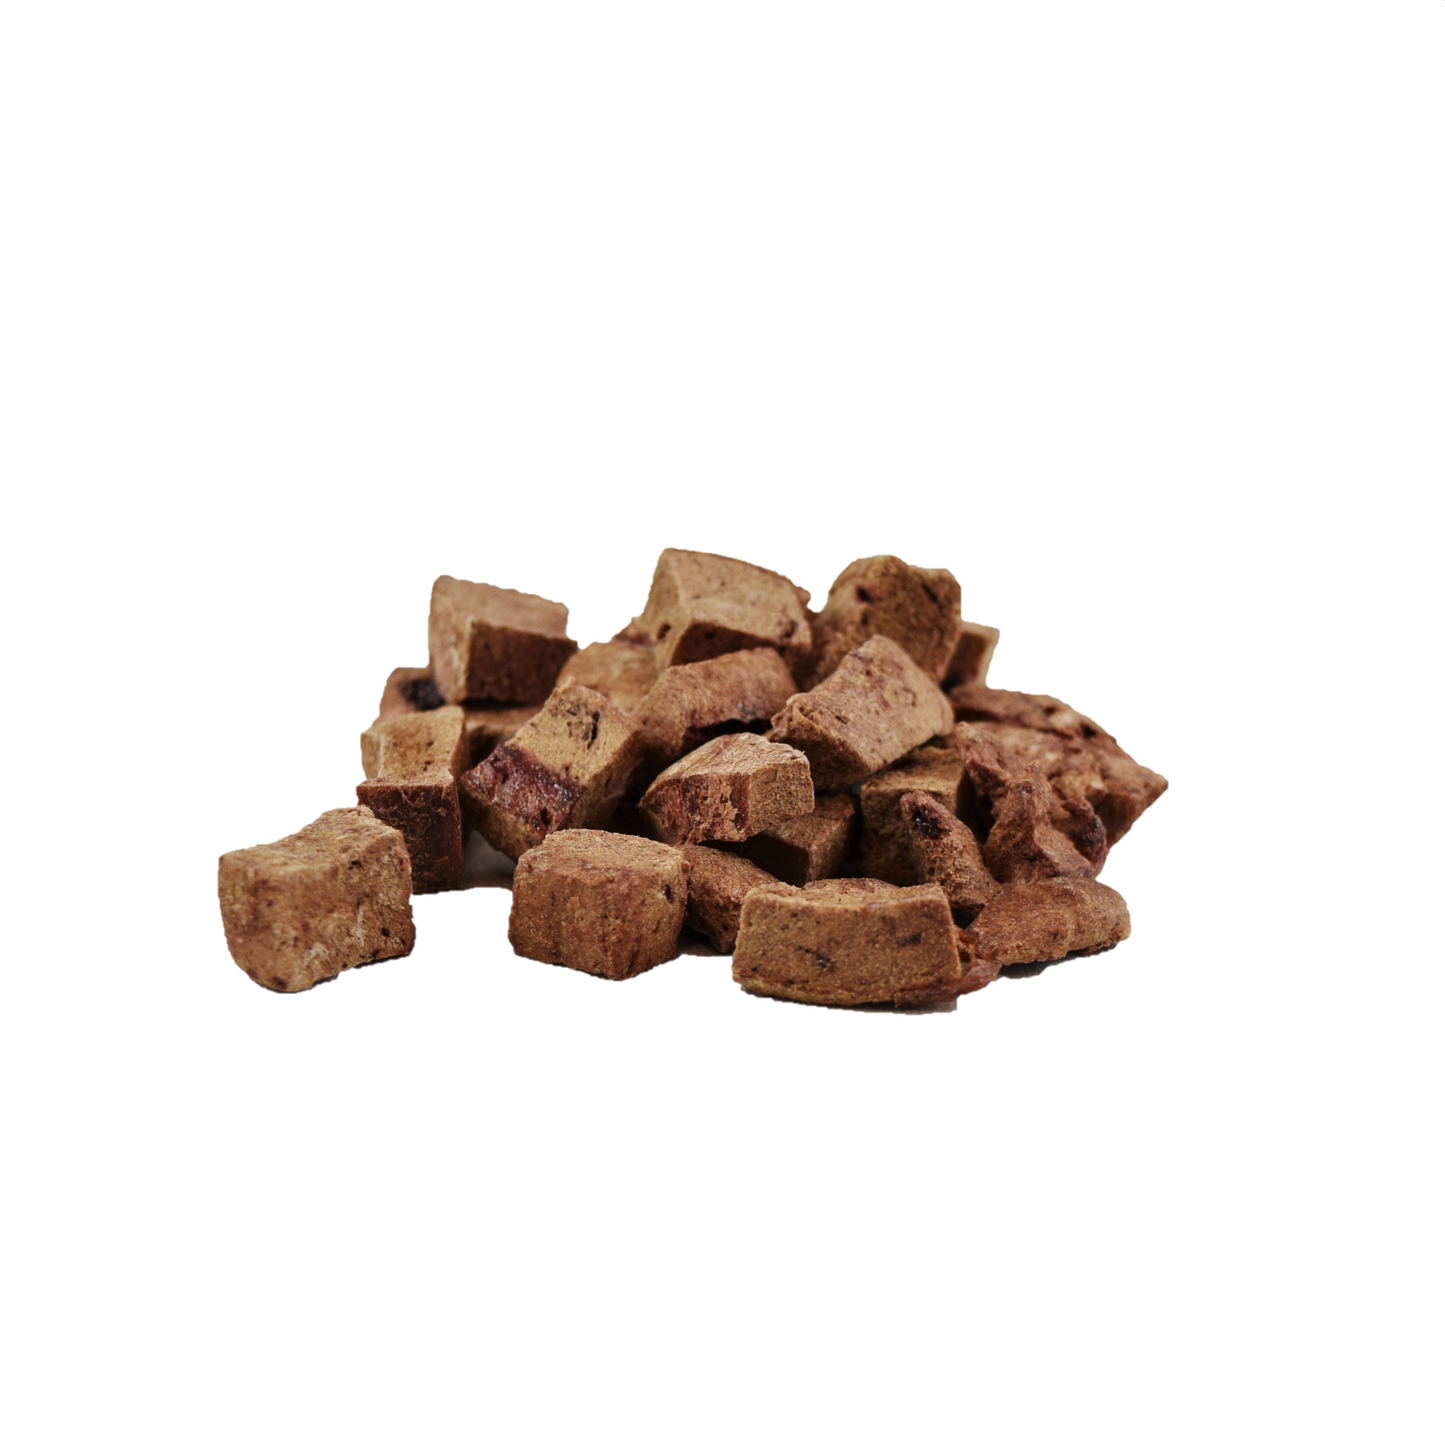 Freeze Dried Beef Liver 120g